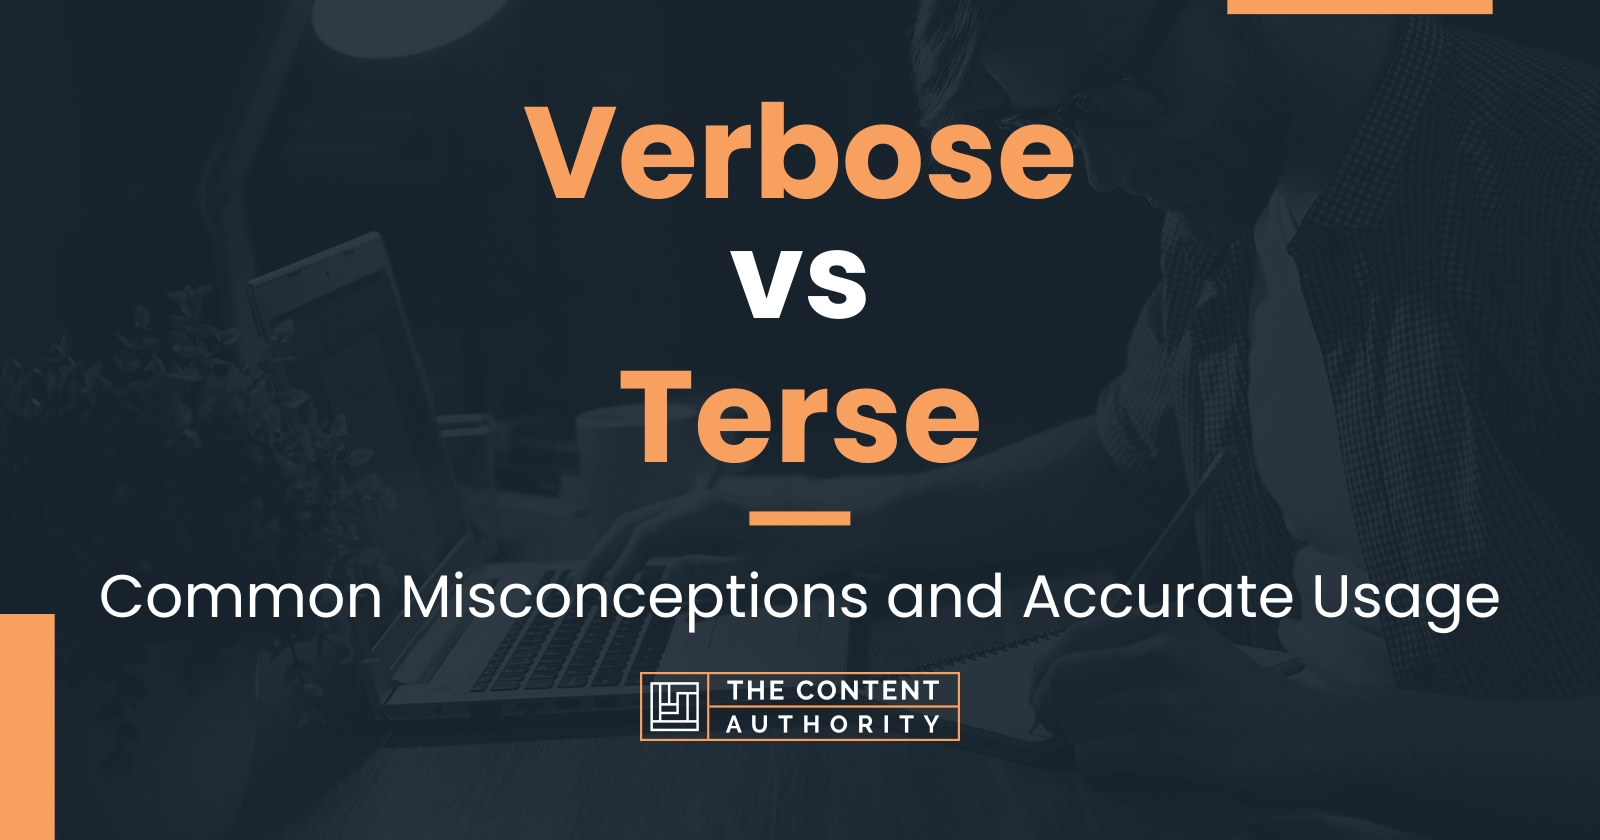 Verbose vs Terse: Common Misconceptions and Accurate Usage